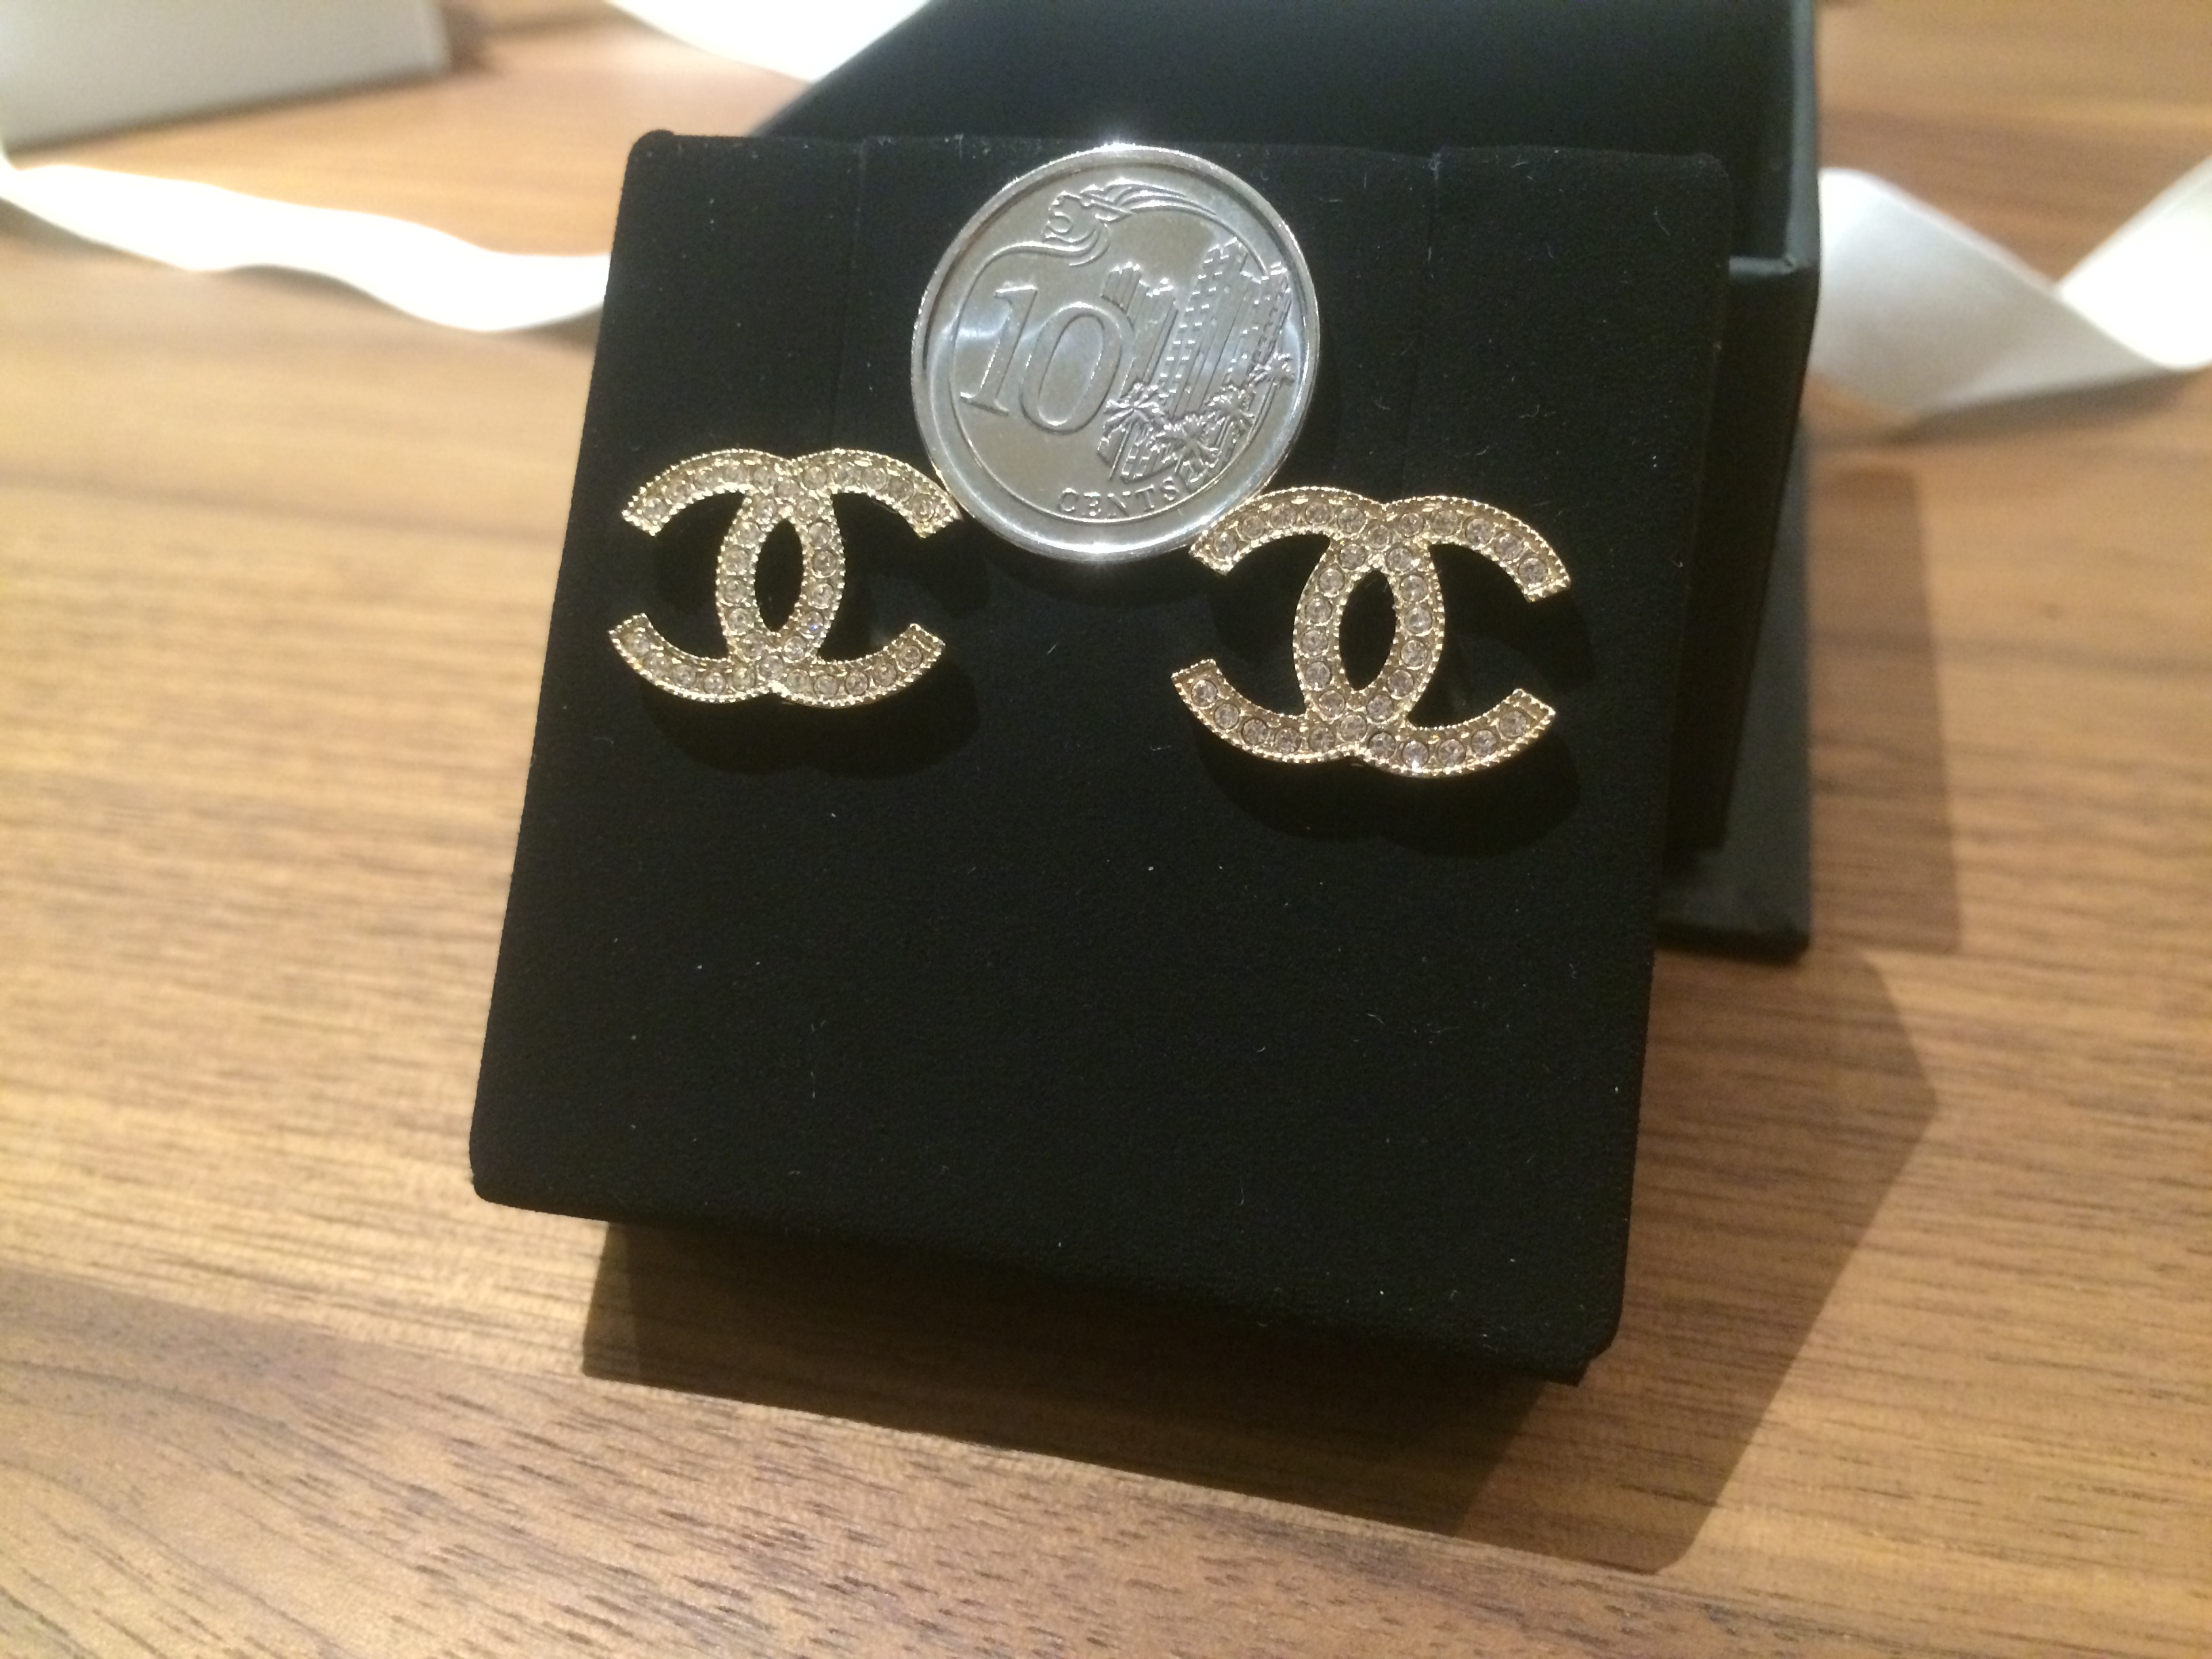 SOLD] FOR SALE: DOUBLE C CLASSIC CHANEL EARRINGS (GOLD)